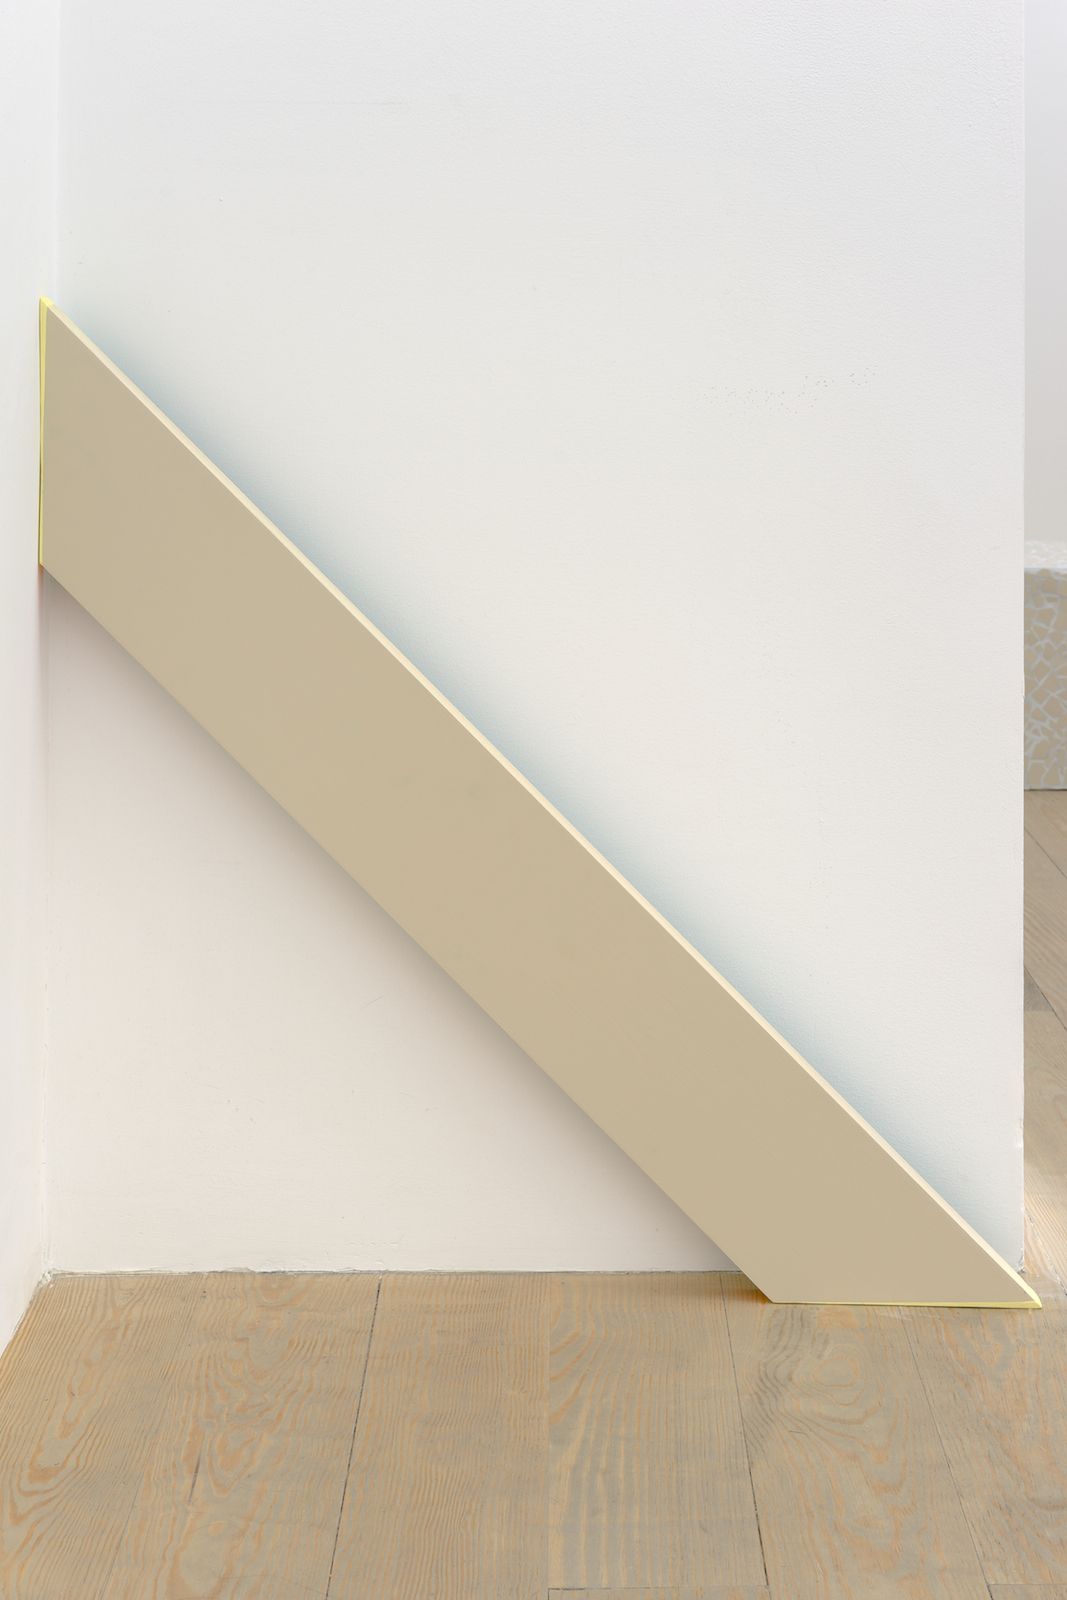 Gordon Hall, Set (VI), 2014, acrylic, oil paint, colored pencil and pigmented joint compound on wood, 48 × 8 × 2 1⁄2 in.